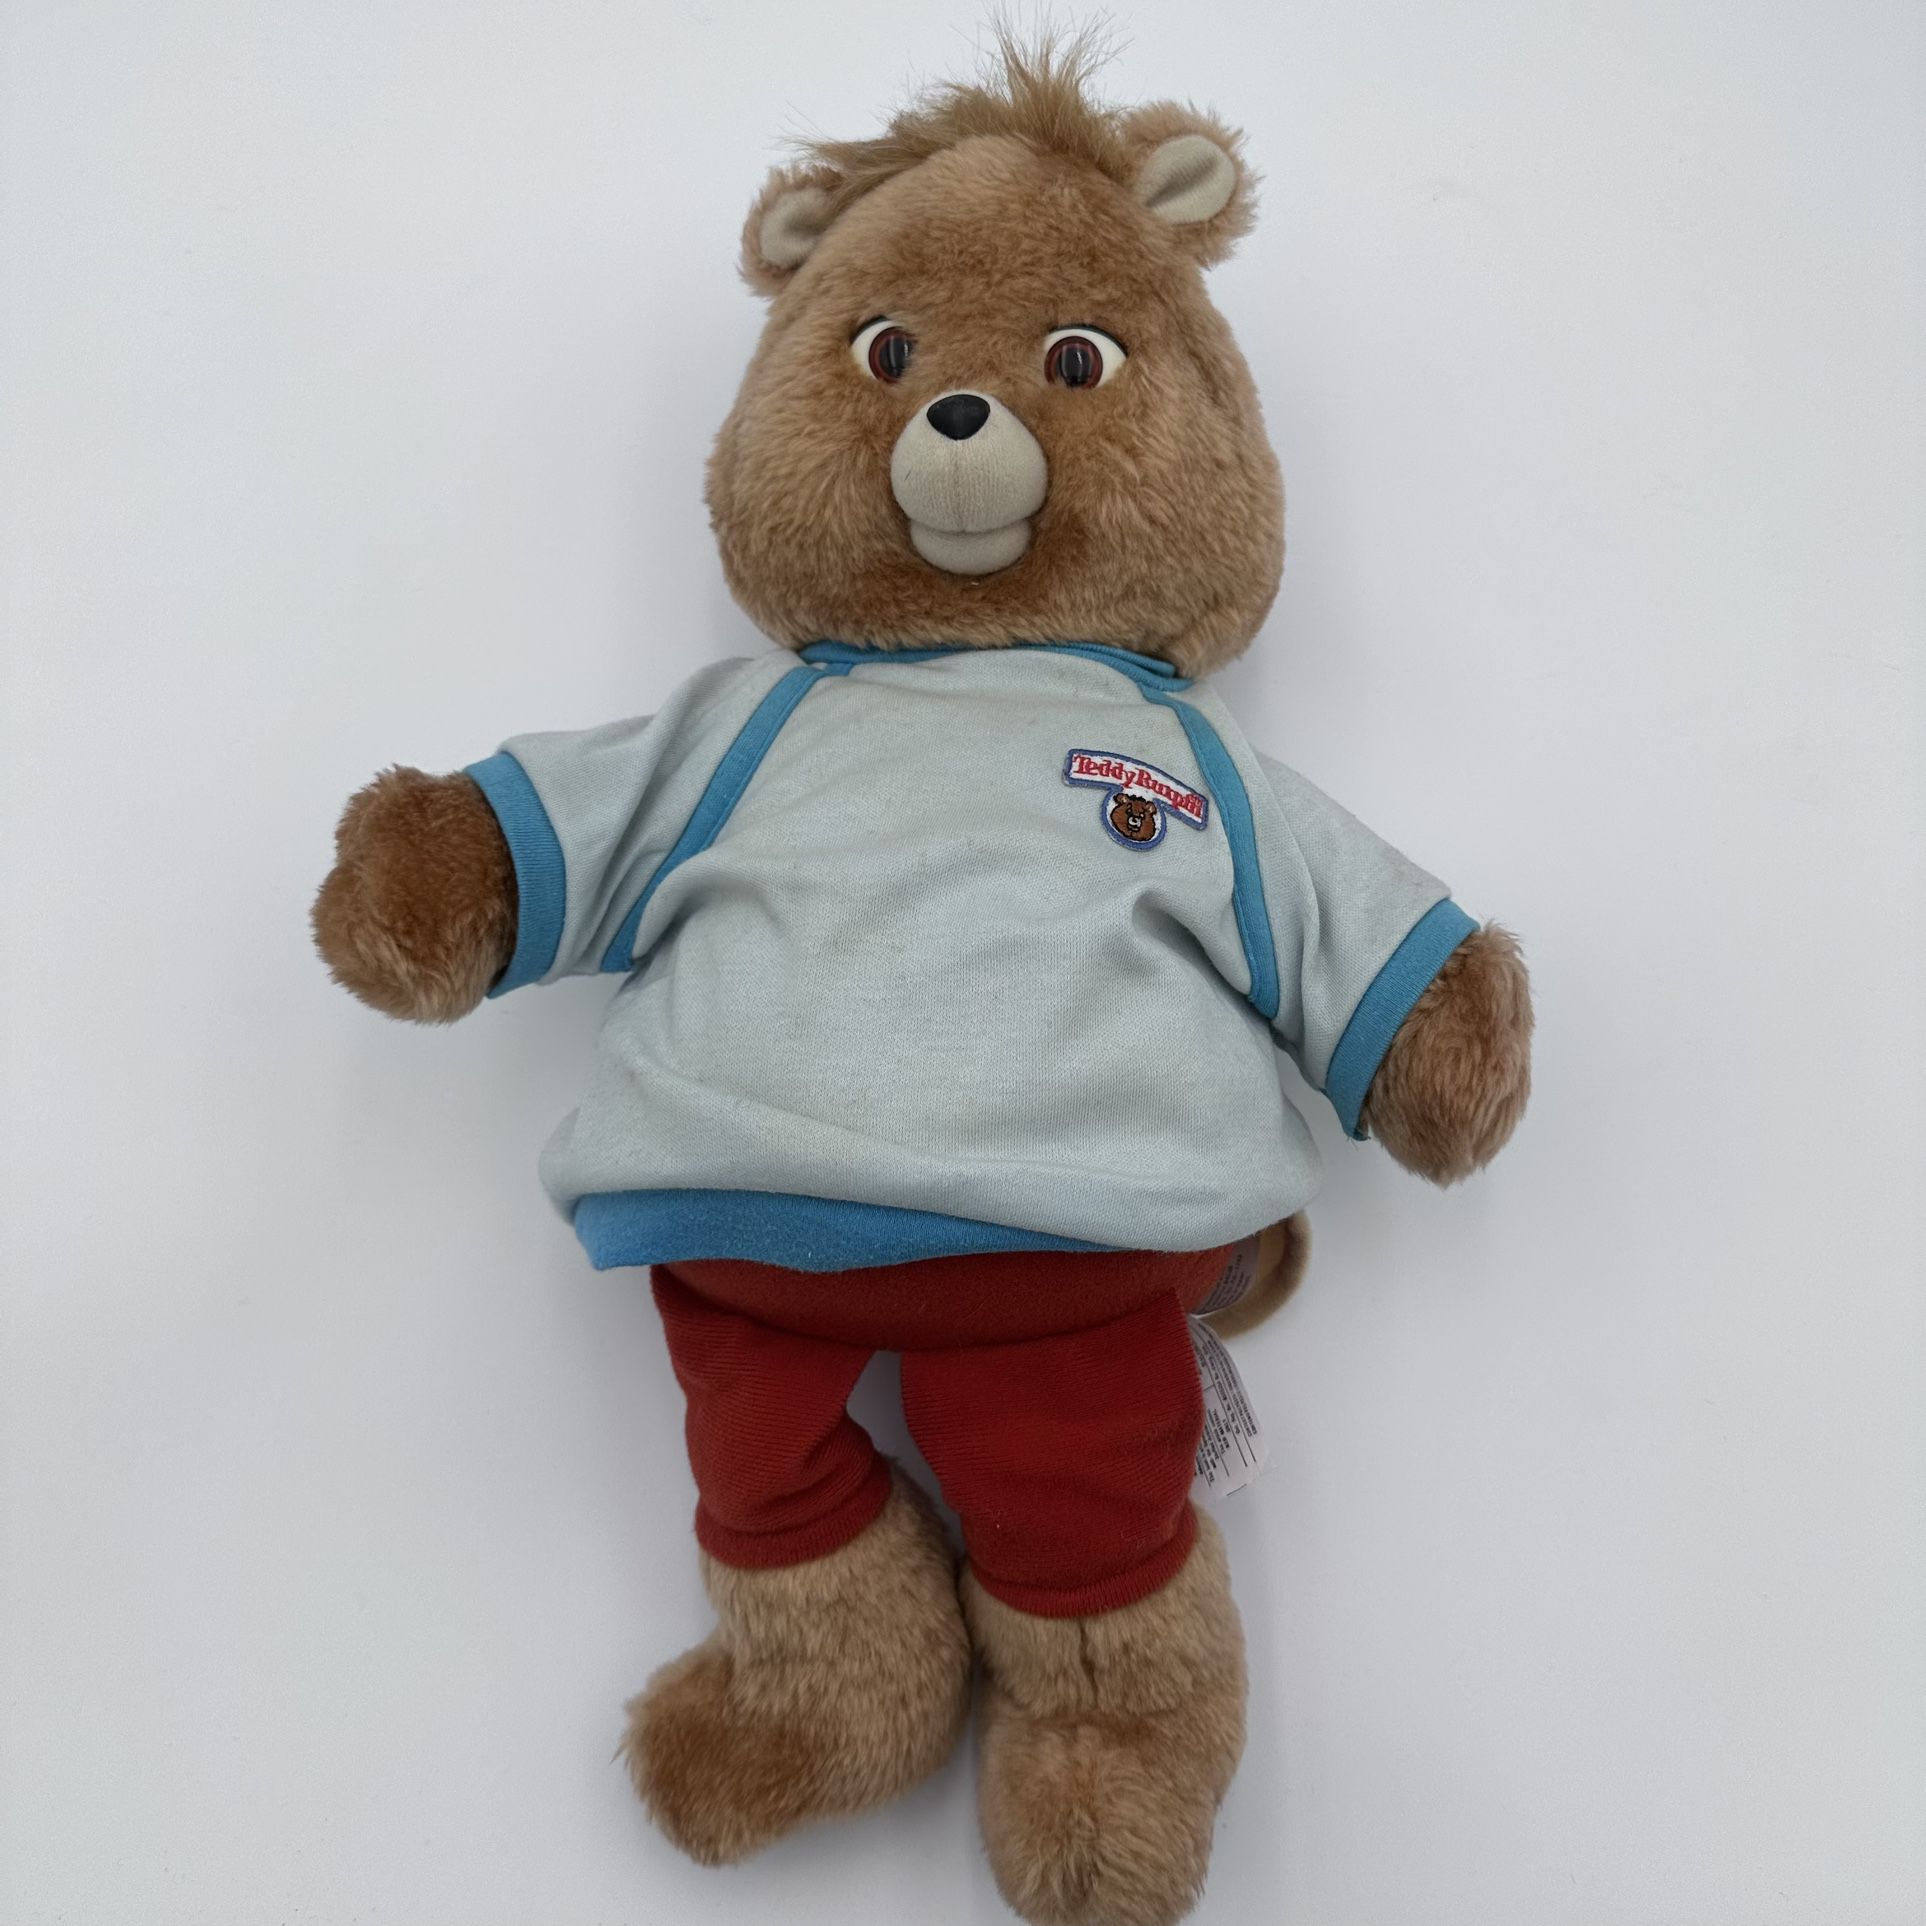 Teddy Ruxpin Vintage 1985 Worlds of Wonder With Tape And Book Read Description 